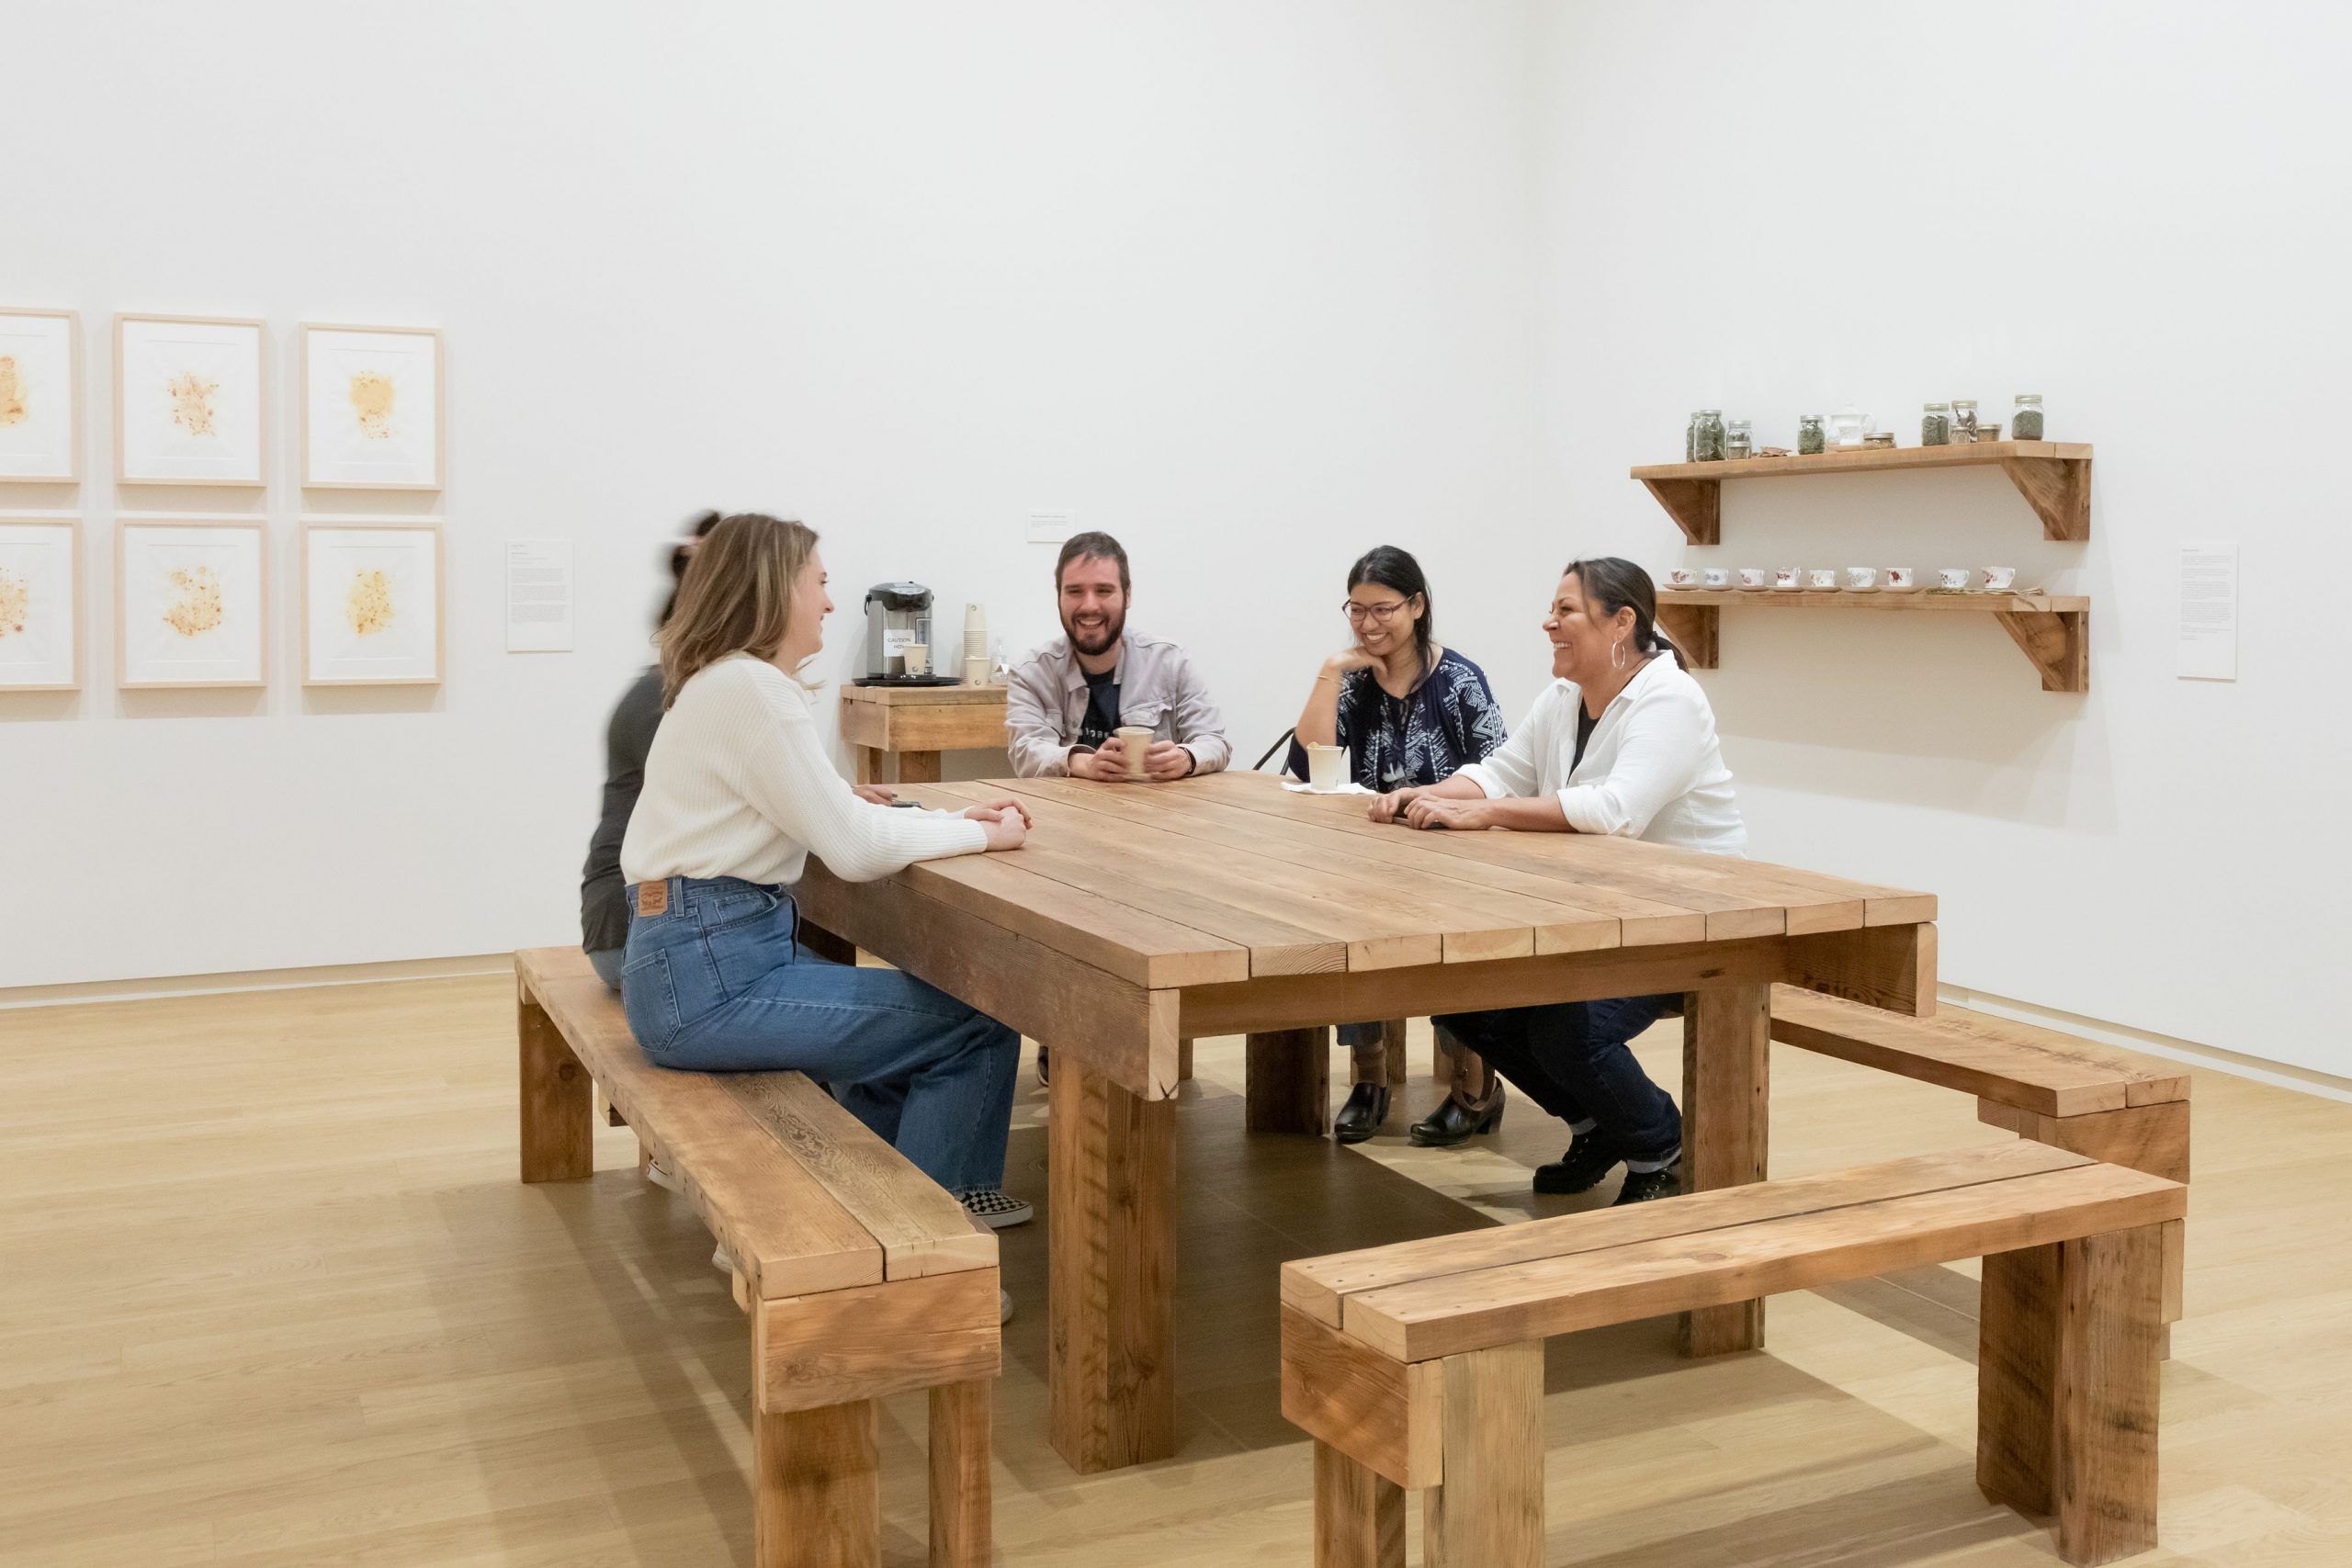 5 people sitting around a table sharing stories